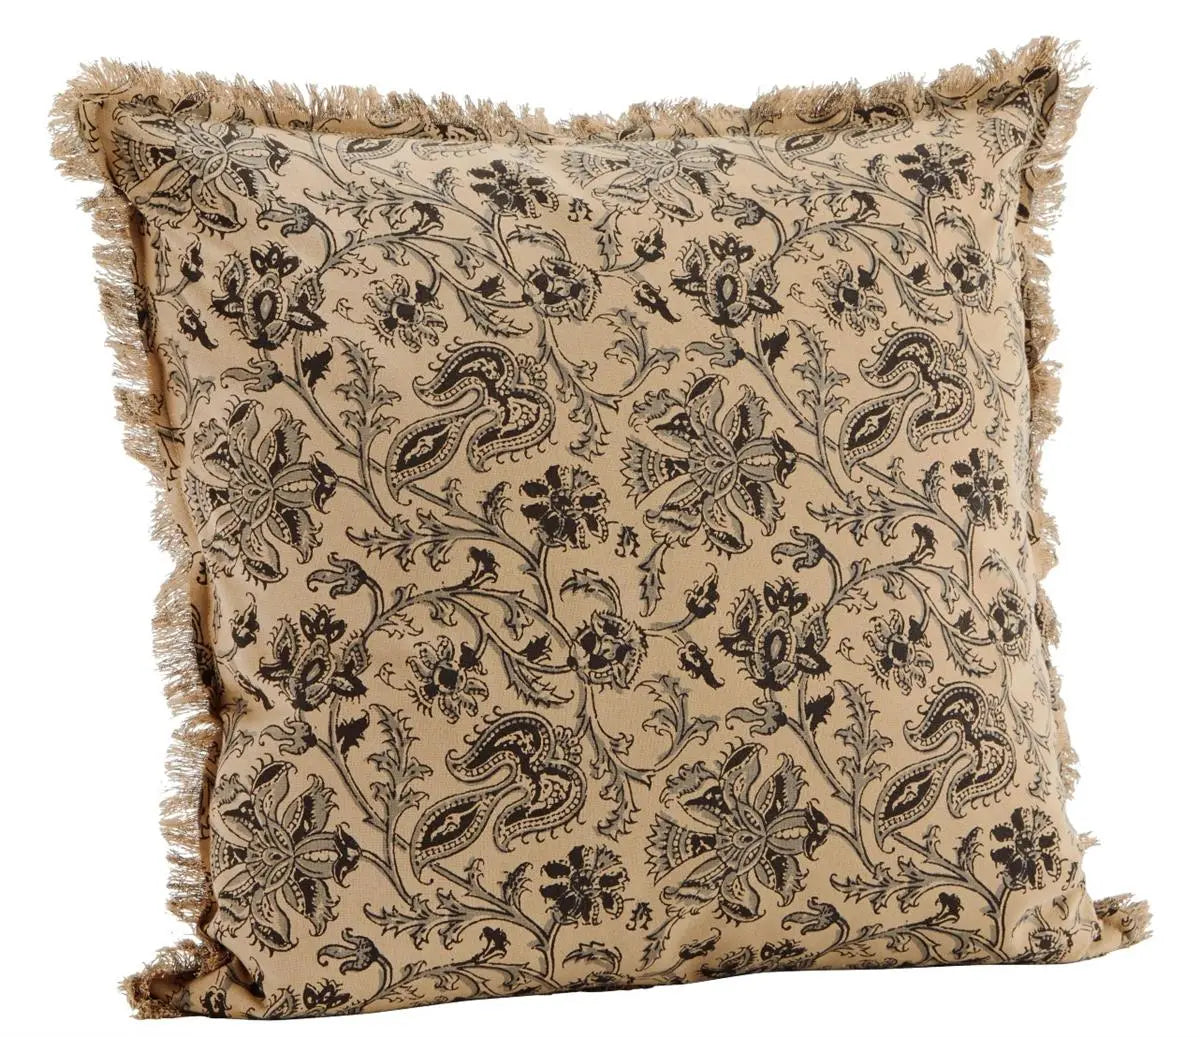 Printed Cotton Cushion W Fringes Wooden Horse